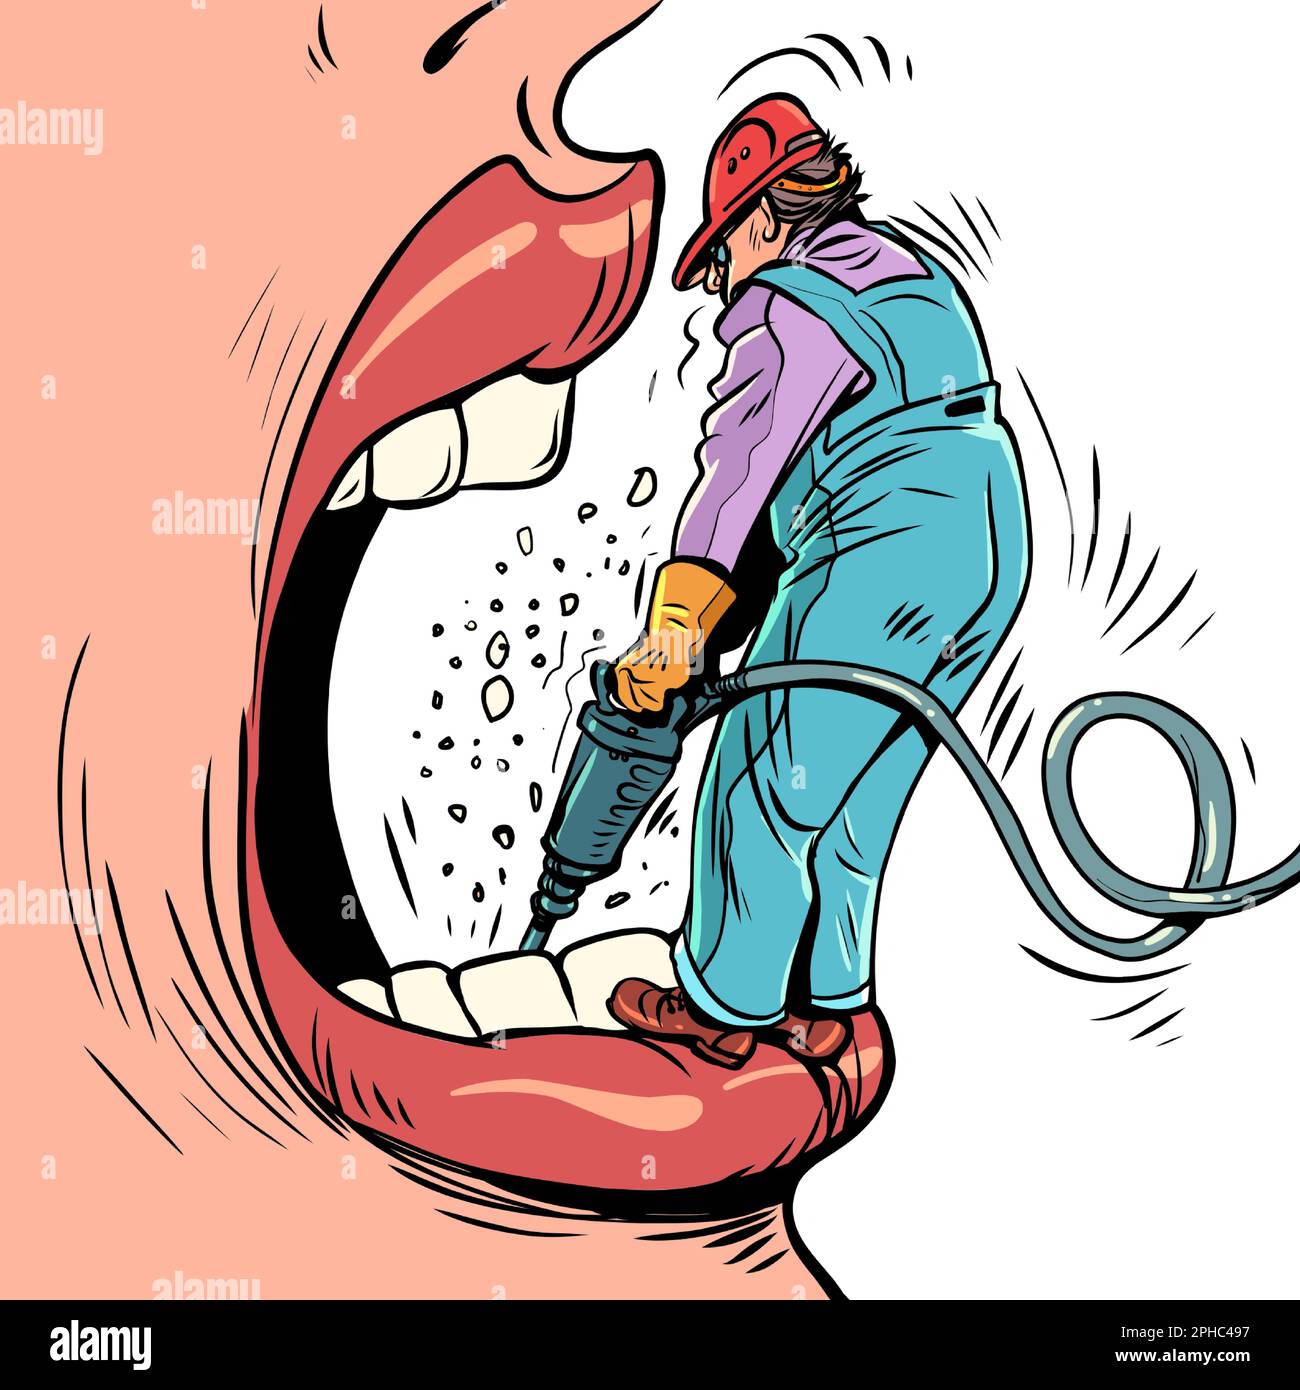 Taking care of your health. Dental treatment by a professional doctor. The hard work of doctors. Woman open mouth and a row of teeth and a worker with Stock Vector